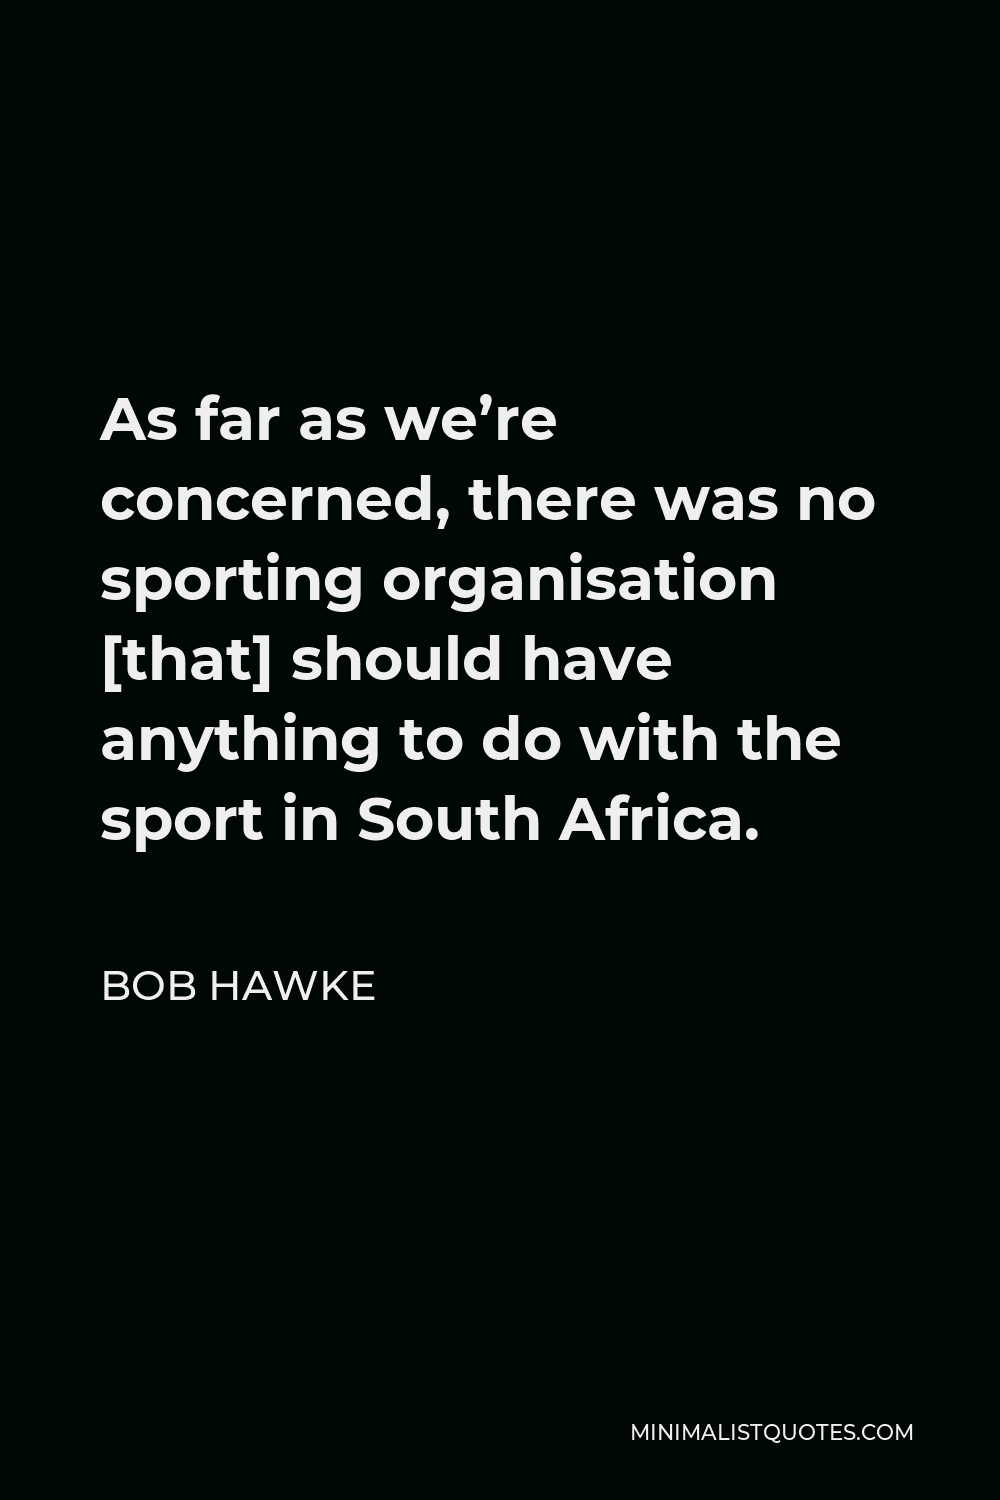 Bob Hawke Quote - As far as we’re concerned, there was no sporting organisation [that] should have anything to do with the sport in South Africa.